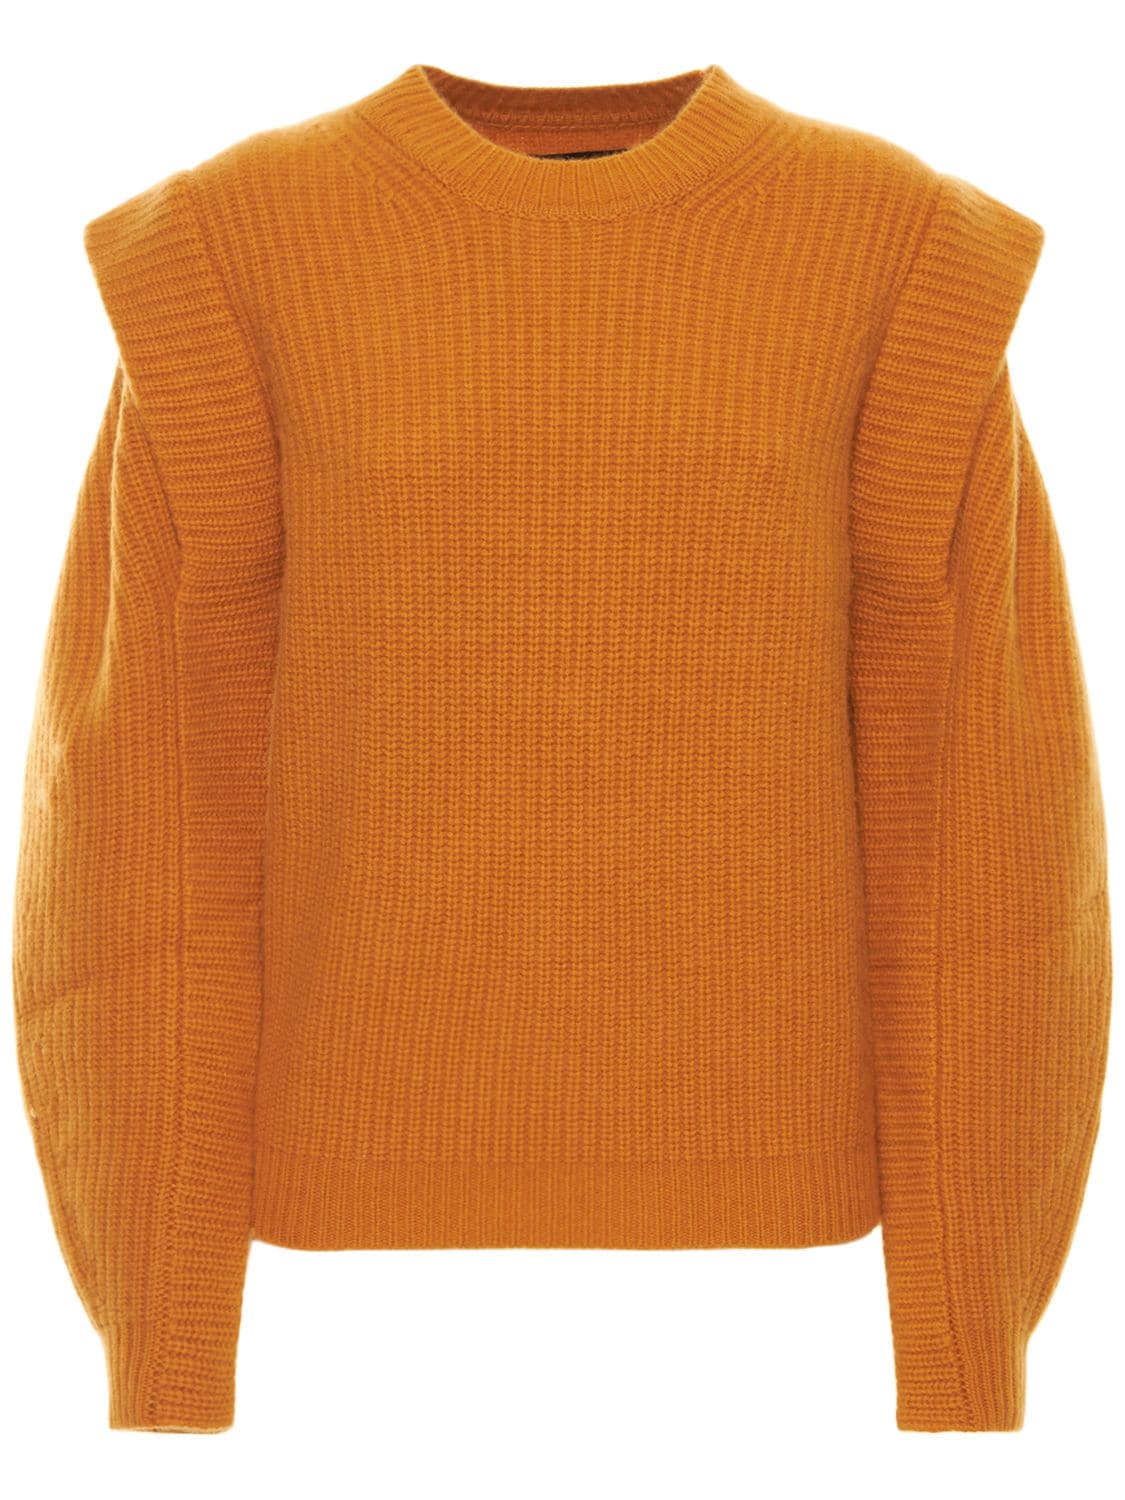 ISABEL MARANT Bolton Wool & Cashmere Knit Sweater